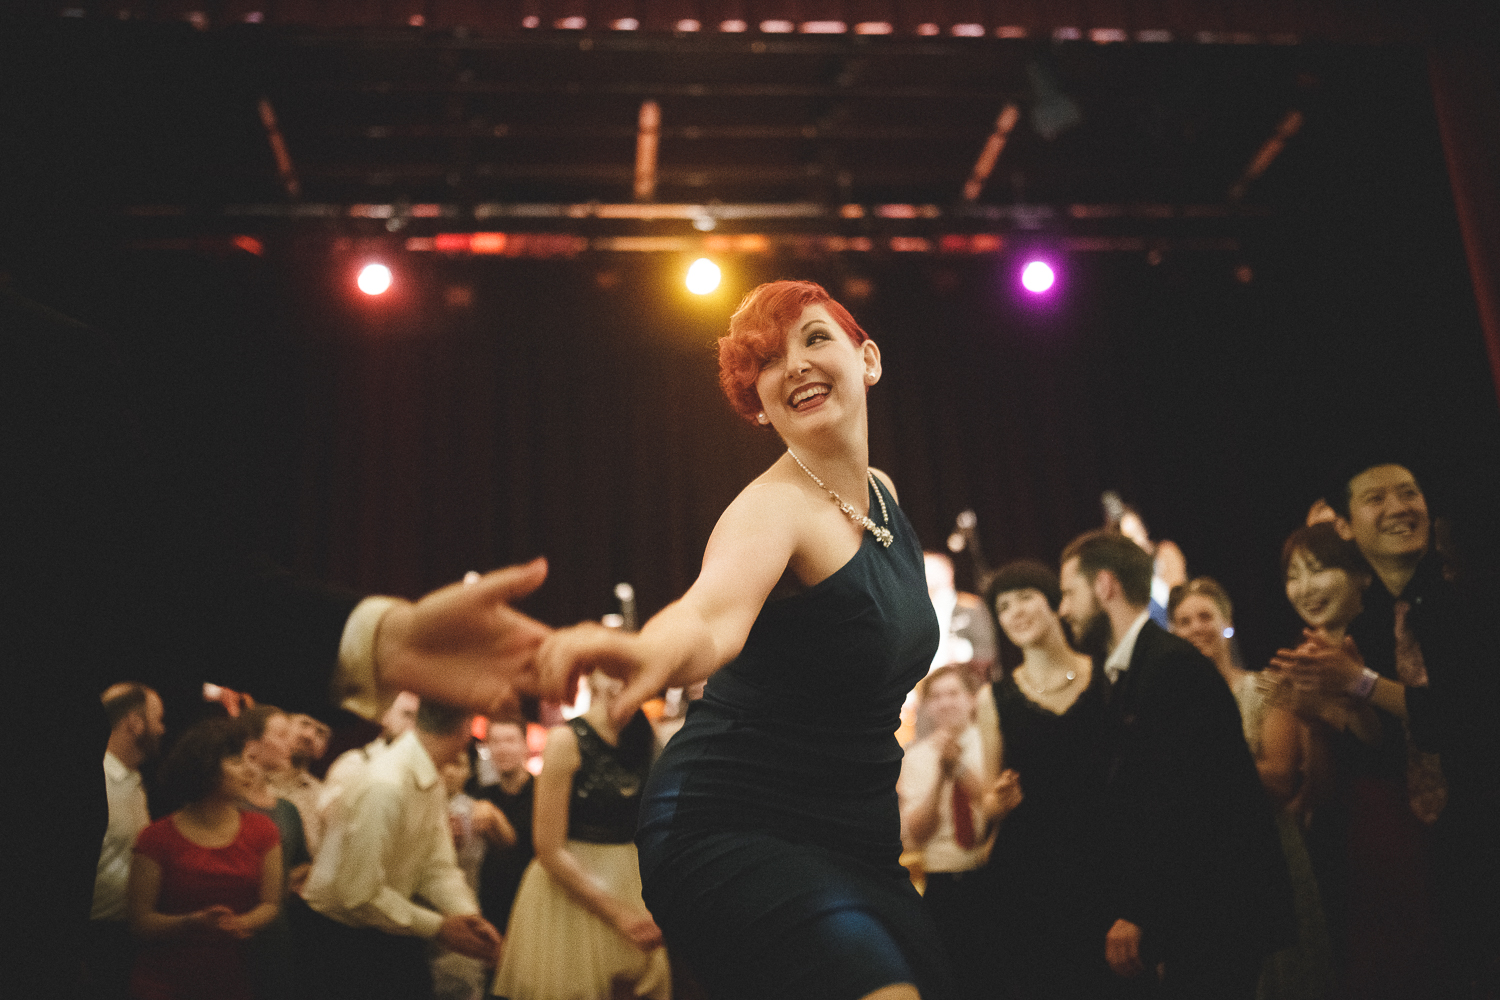  The London Swing Festival 2016 - Photo Credit: For Dancers Only - http://www.ebobrie.com/london-swing-festival-2016 